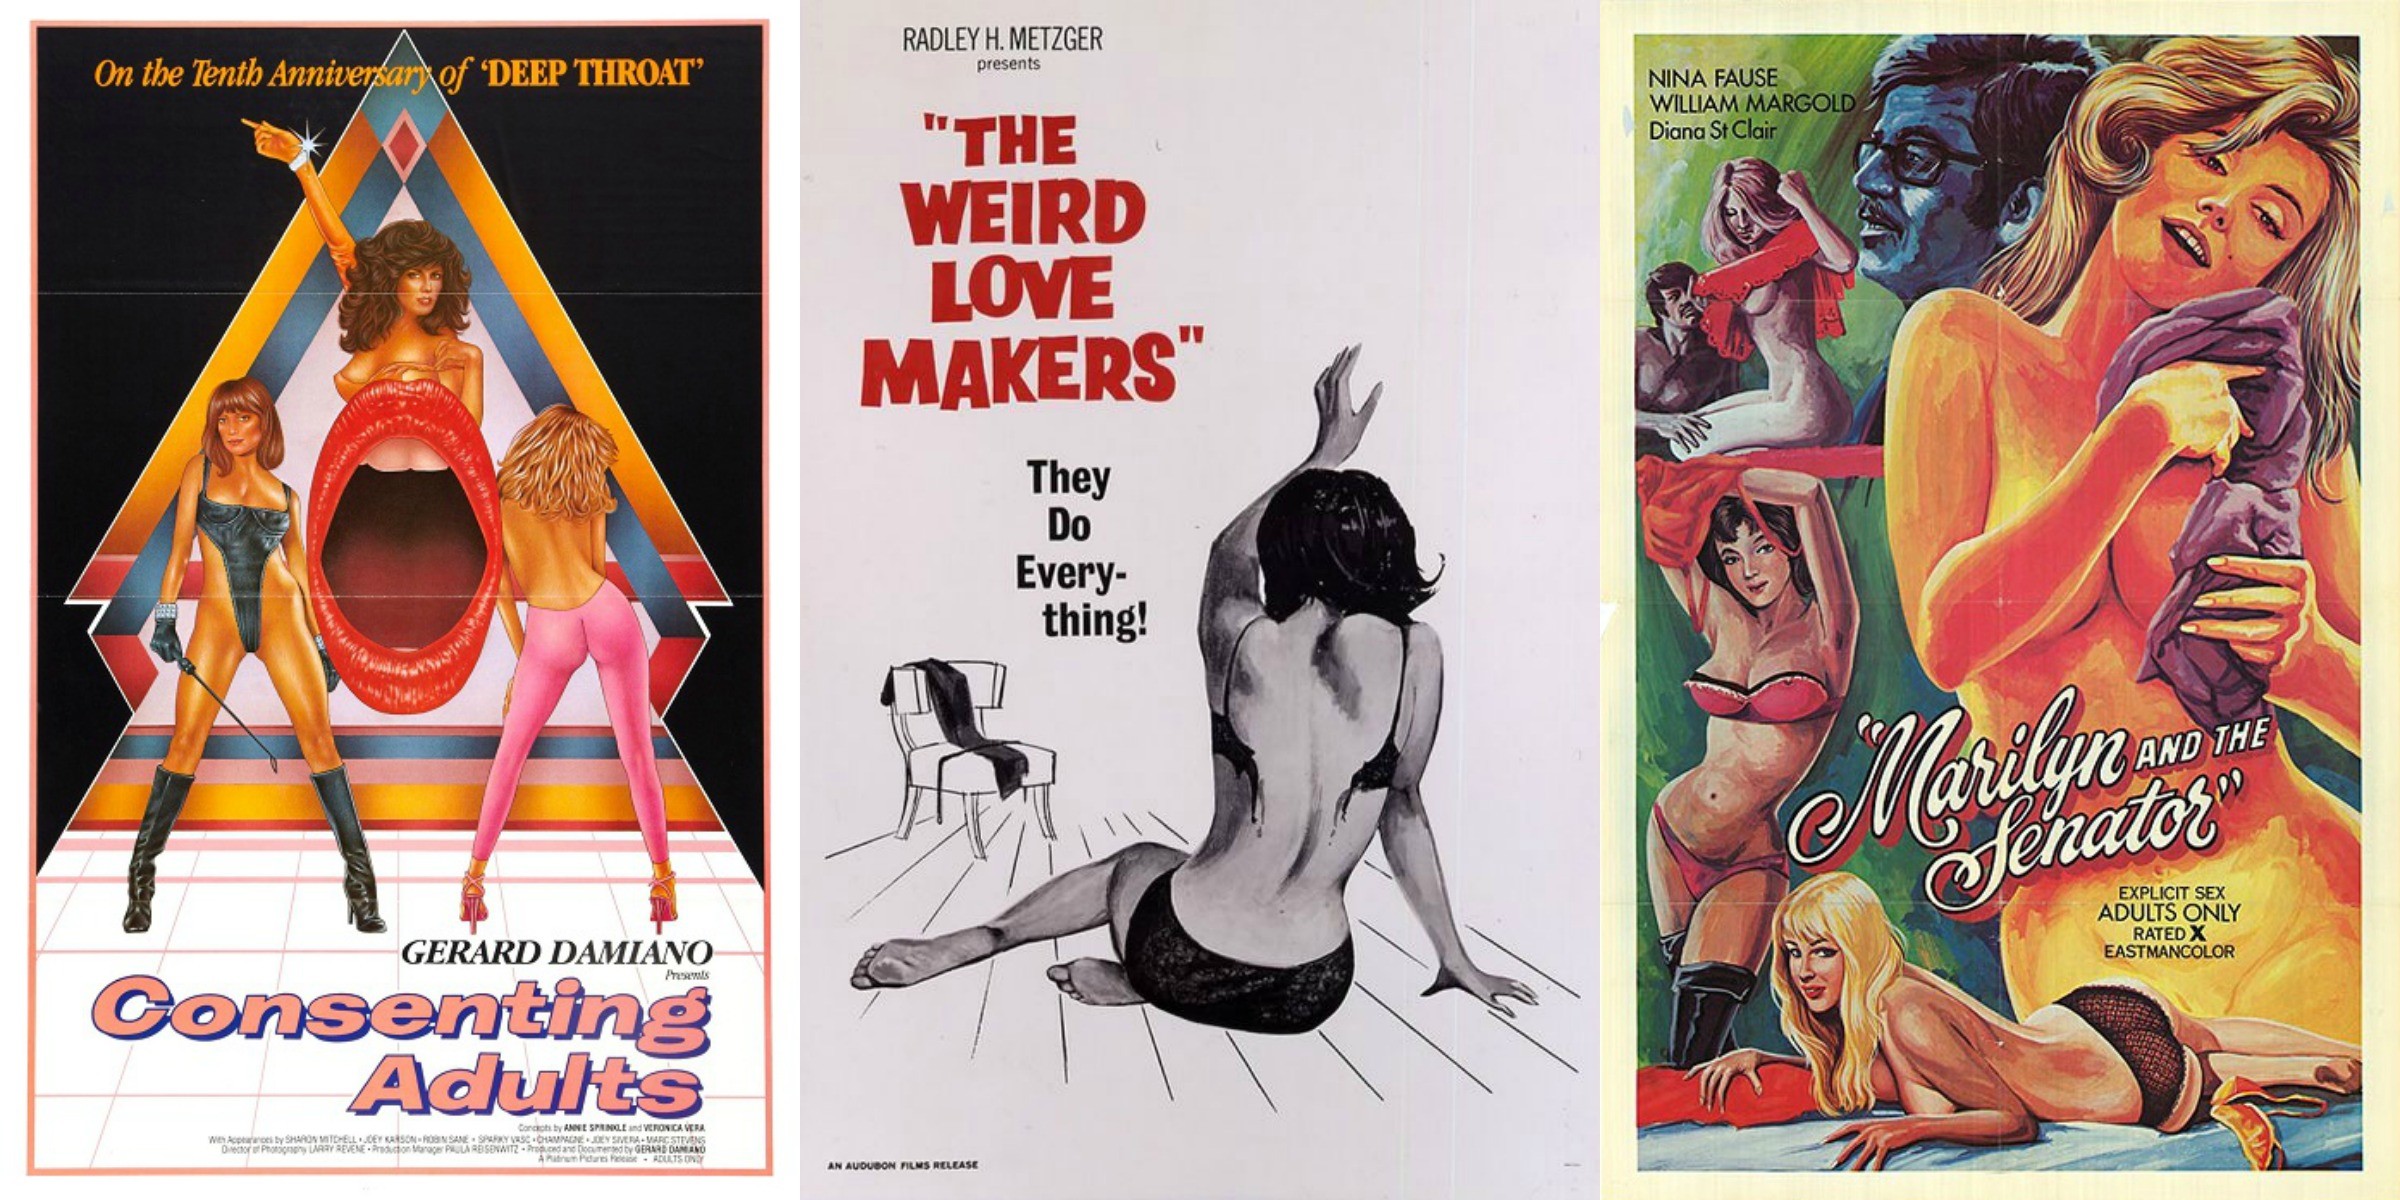 Erotic adult movie posters from the 60s and 70s | City Magazine